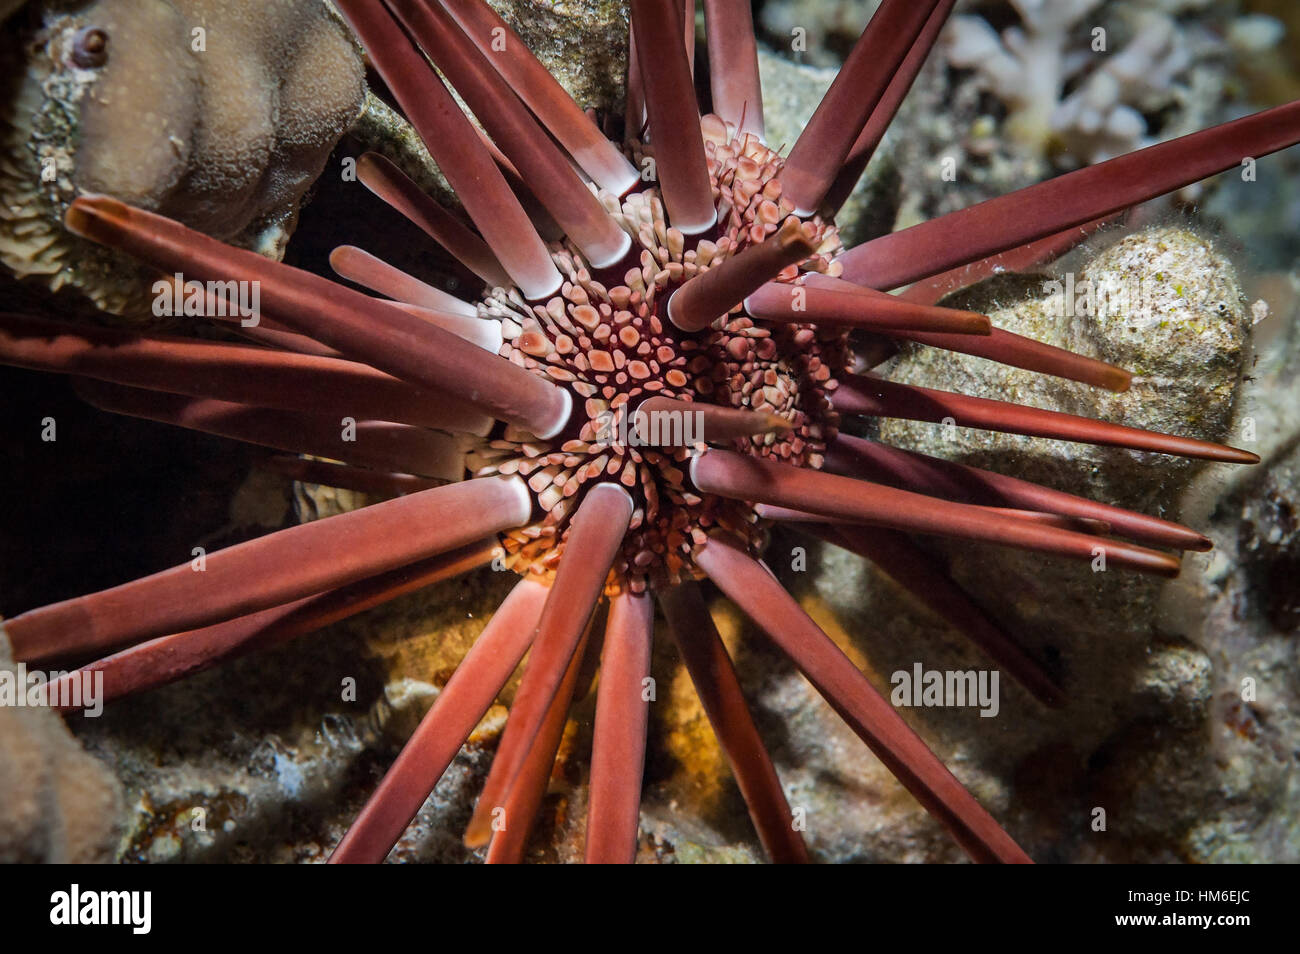 Red slate-pencil urchin (Heterocentrotus mamillatus) on coral reef. Abstract detail showing spines and body. Red Sea, Egypt. October Stock Photo